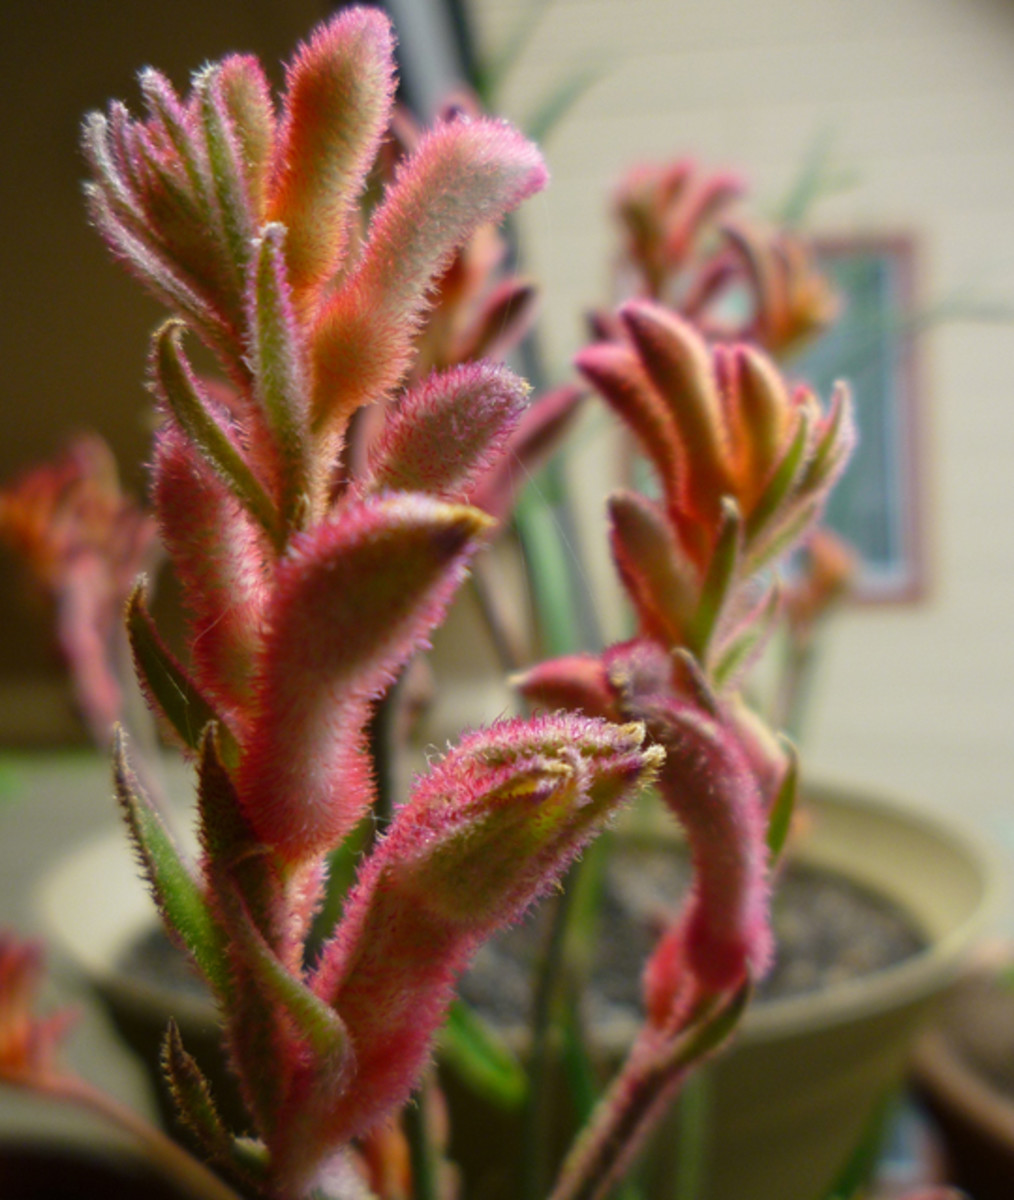 This article teach you how to grow and care for kangaroo paw plants